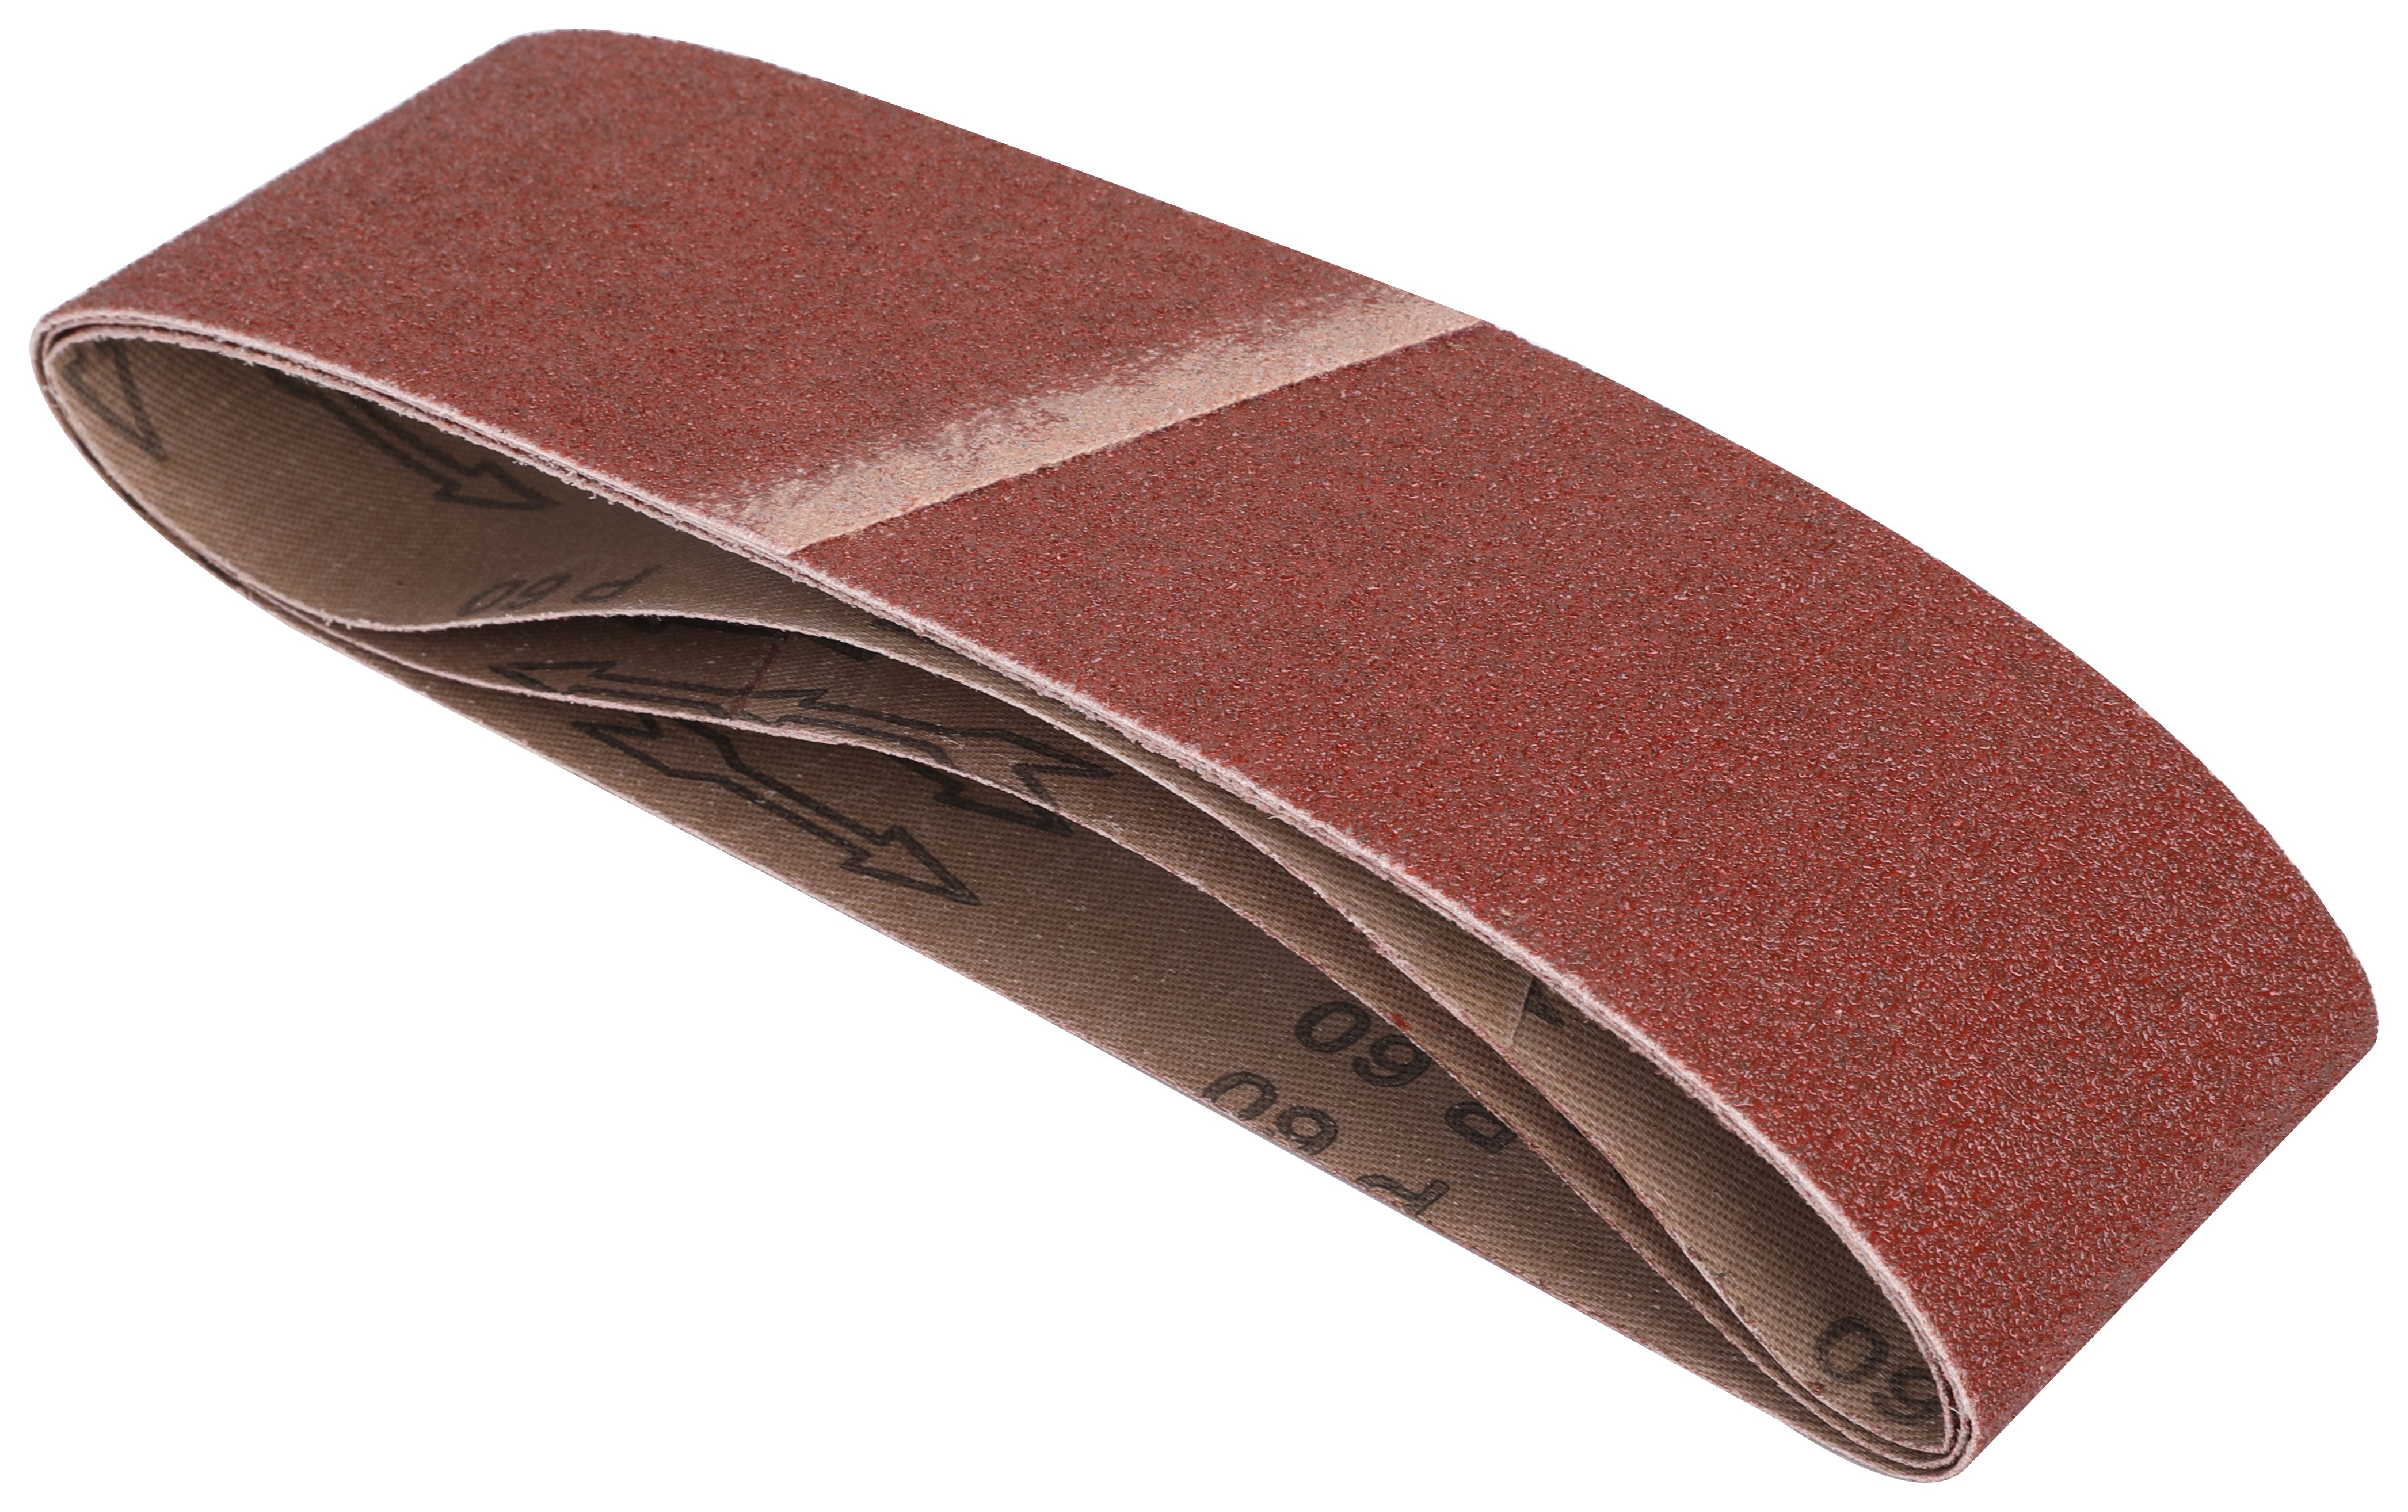 Image of Wickes Coarse 75 x 533mm Sanding Belts - Pack of 3